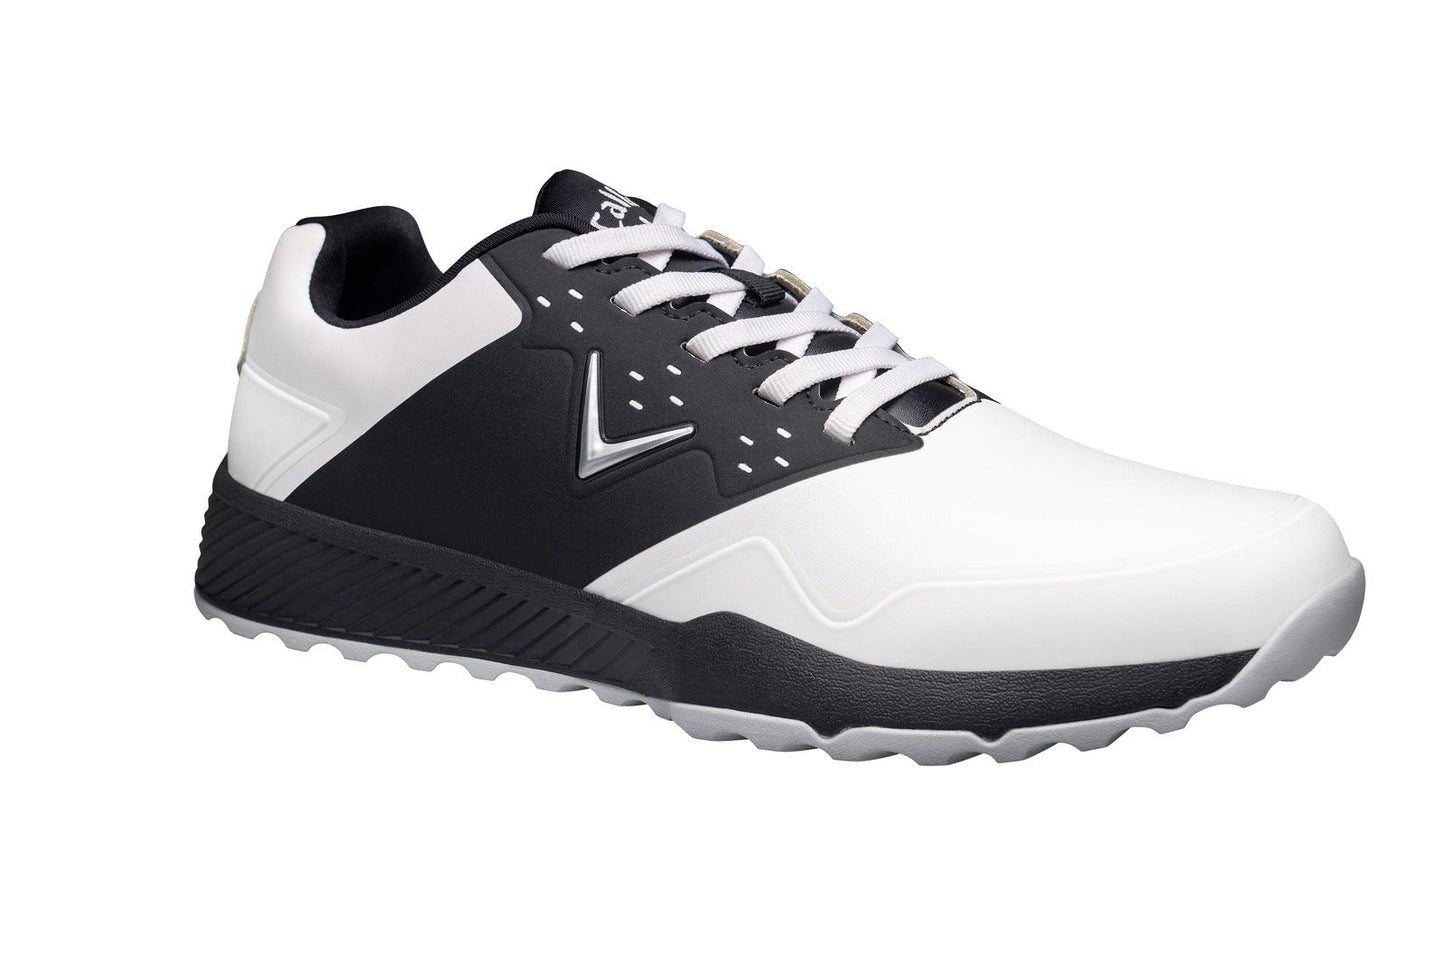 Callaway Chev Ace Golf Shoes M589